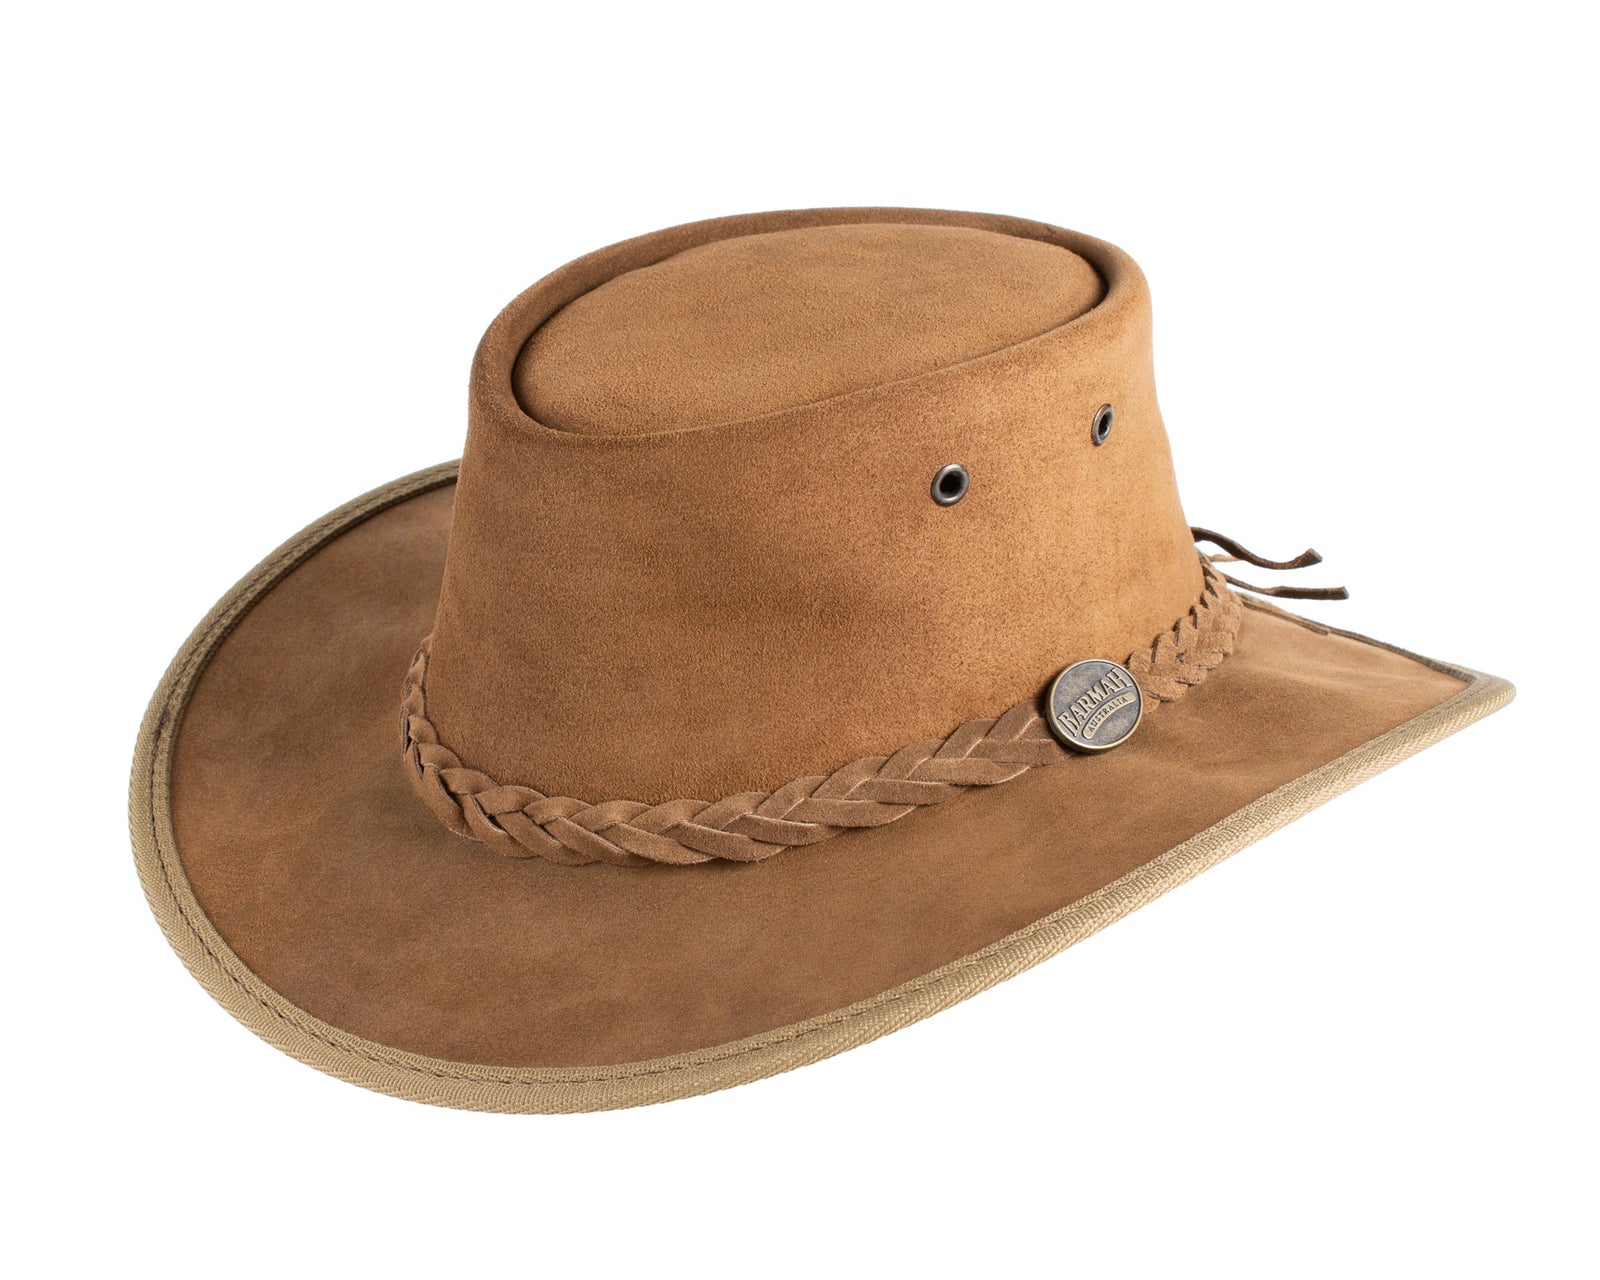 Barmah Hats Australian Suede Leather Cooler Hat Made in Australia Cocoa  Brown Mesh Crown with Cord Chin Strap Size Medium